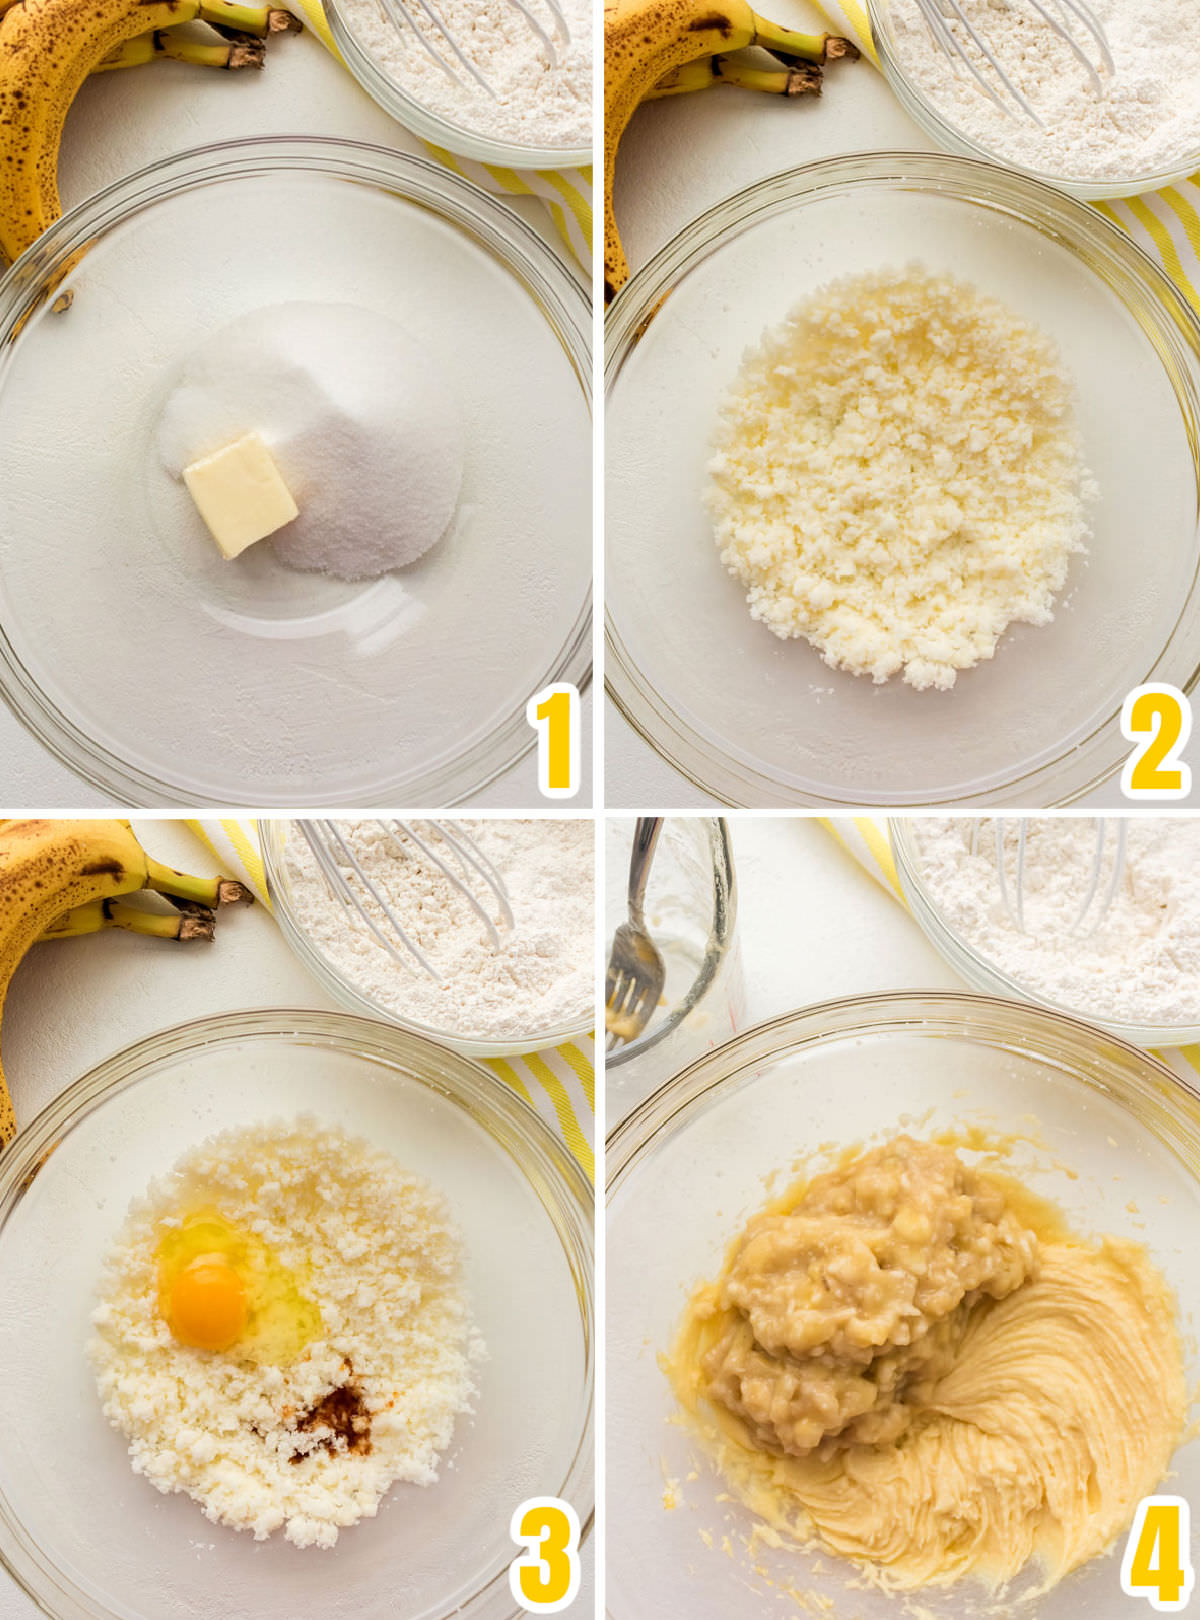 Collage image showing the steps for making the Banana Bread batter.